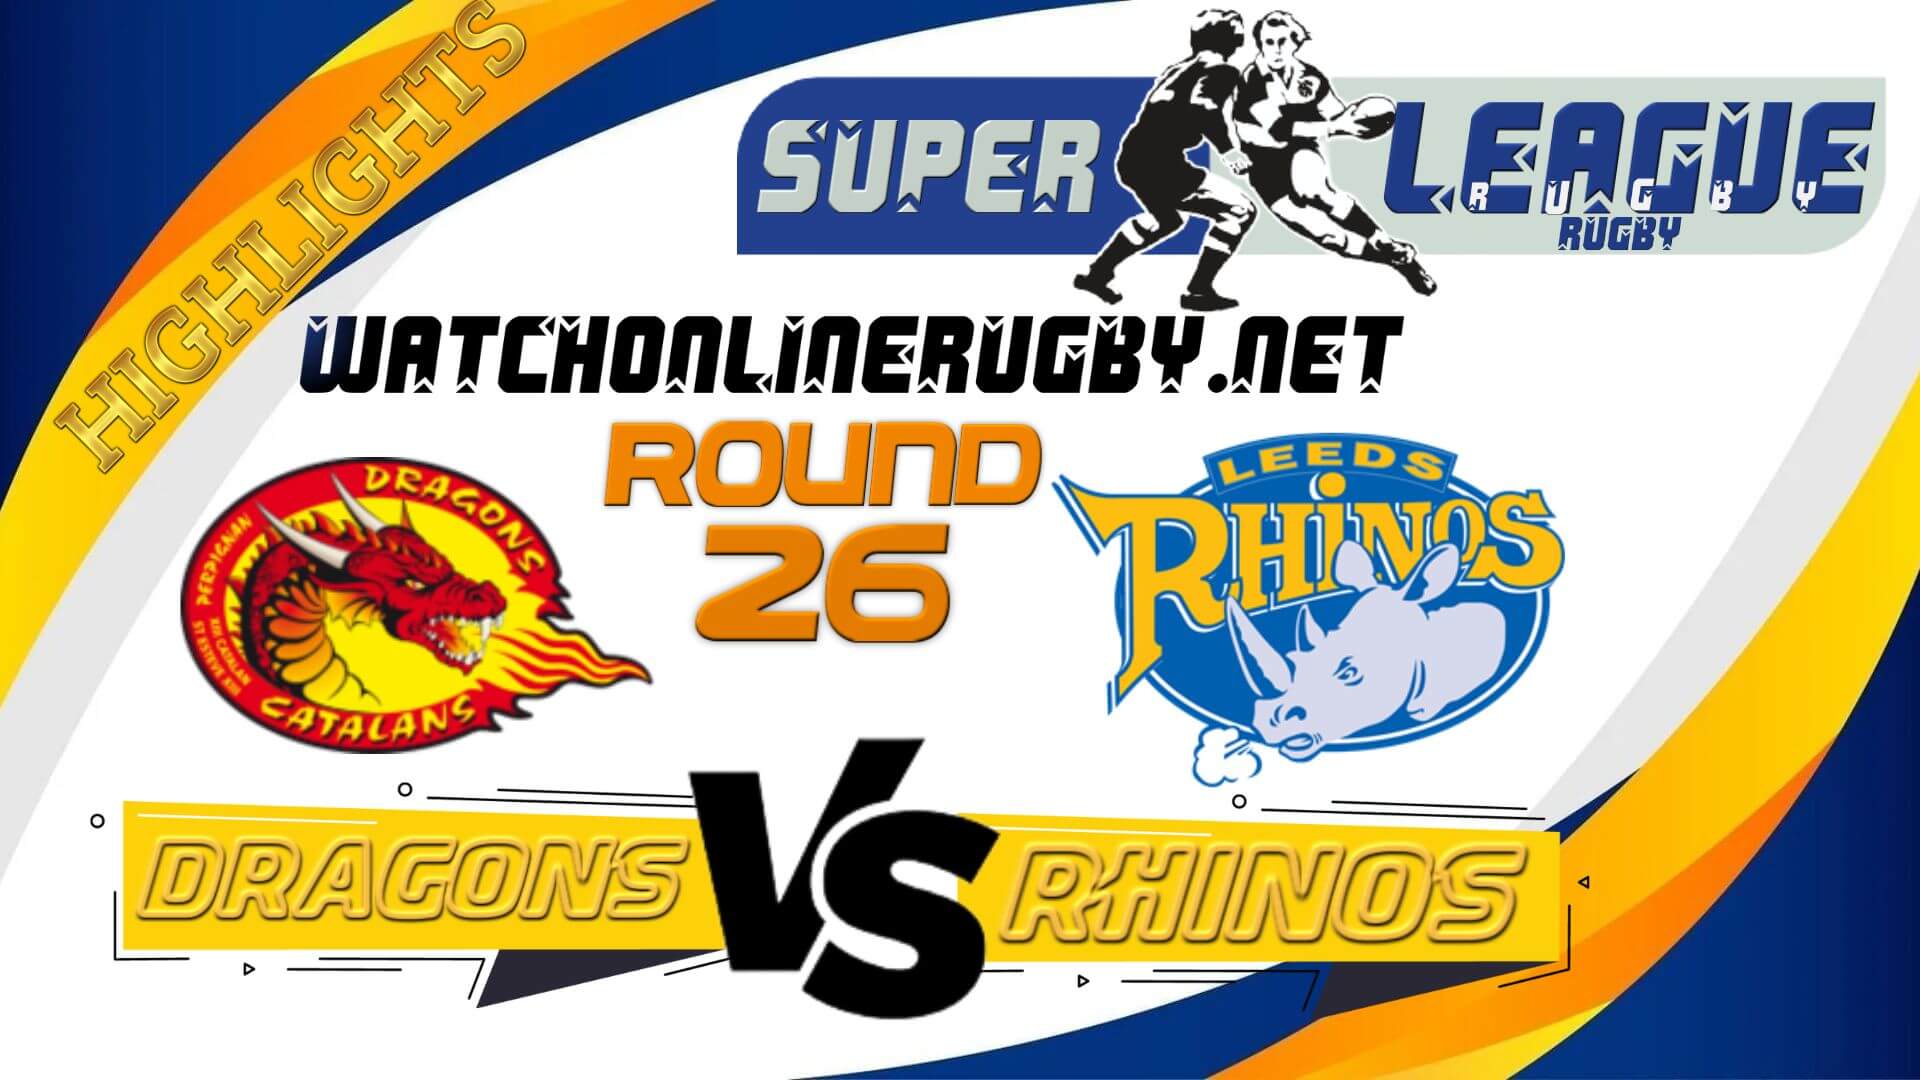 Catalans Dragons Vs Leeds Rhinos Super League Rugby 2022 RD 26